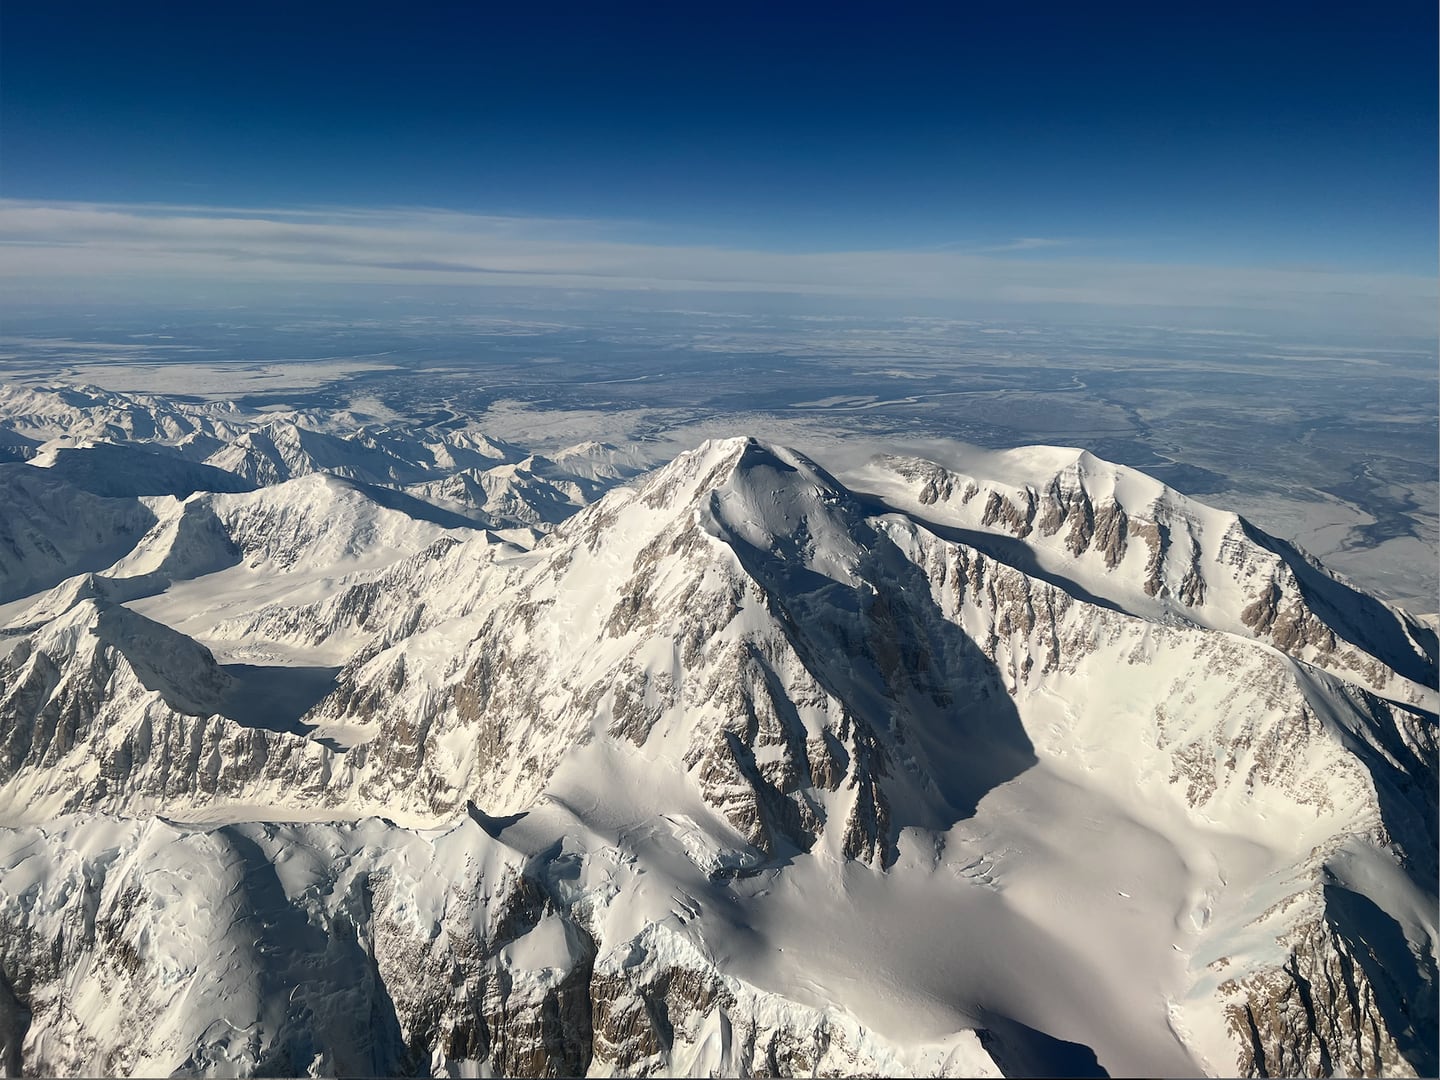 An up-close view of Denali, taken from the window seat on an Alaska Airlines flight to Fairbanks